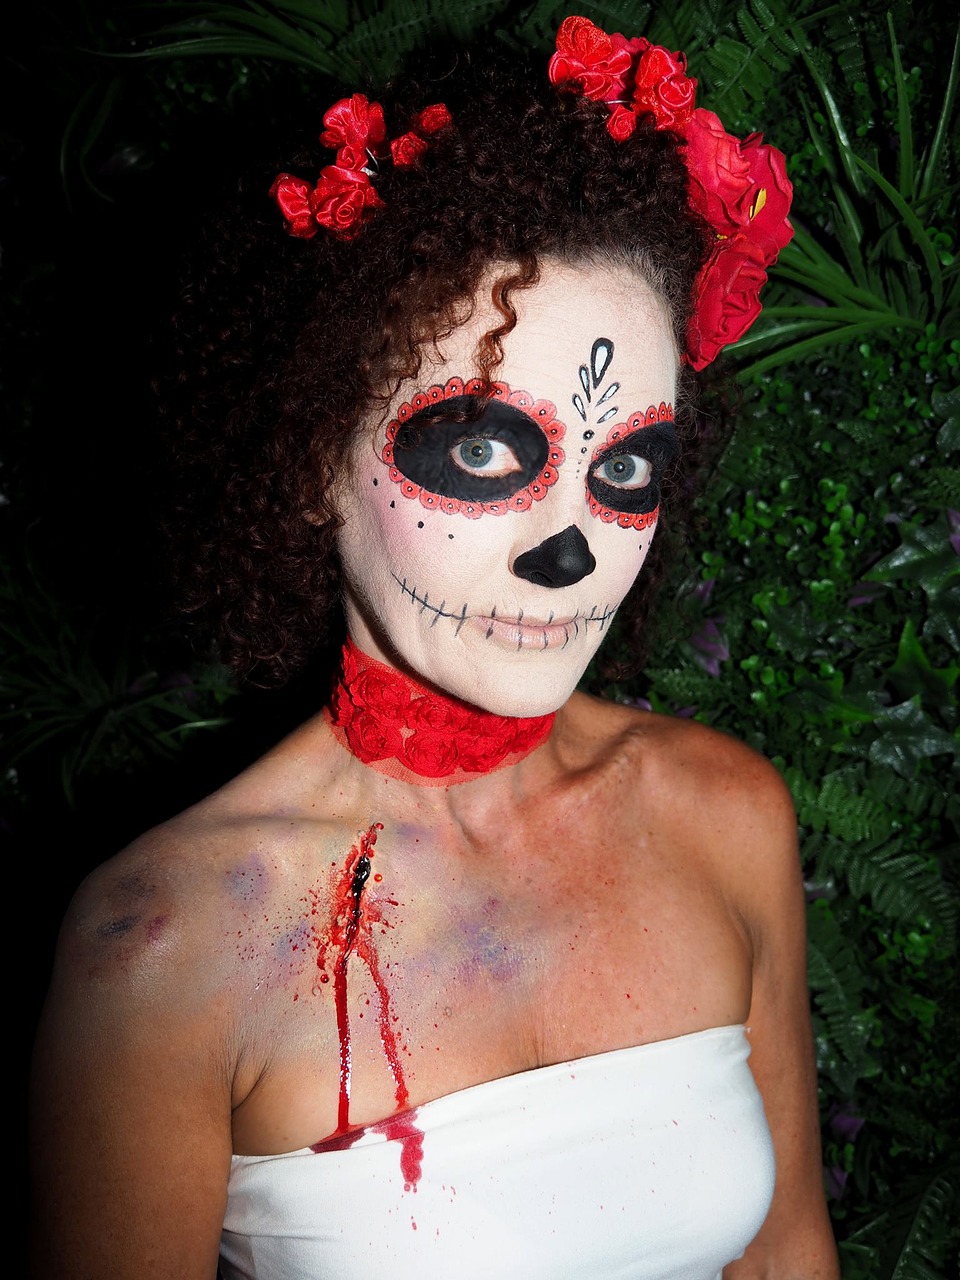 Download free photo of Day of the dead,halloween costume,professional ...